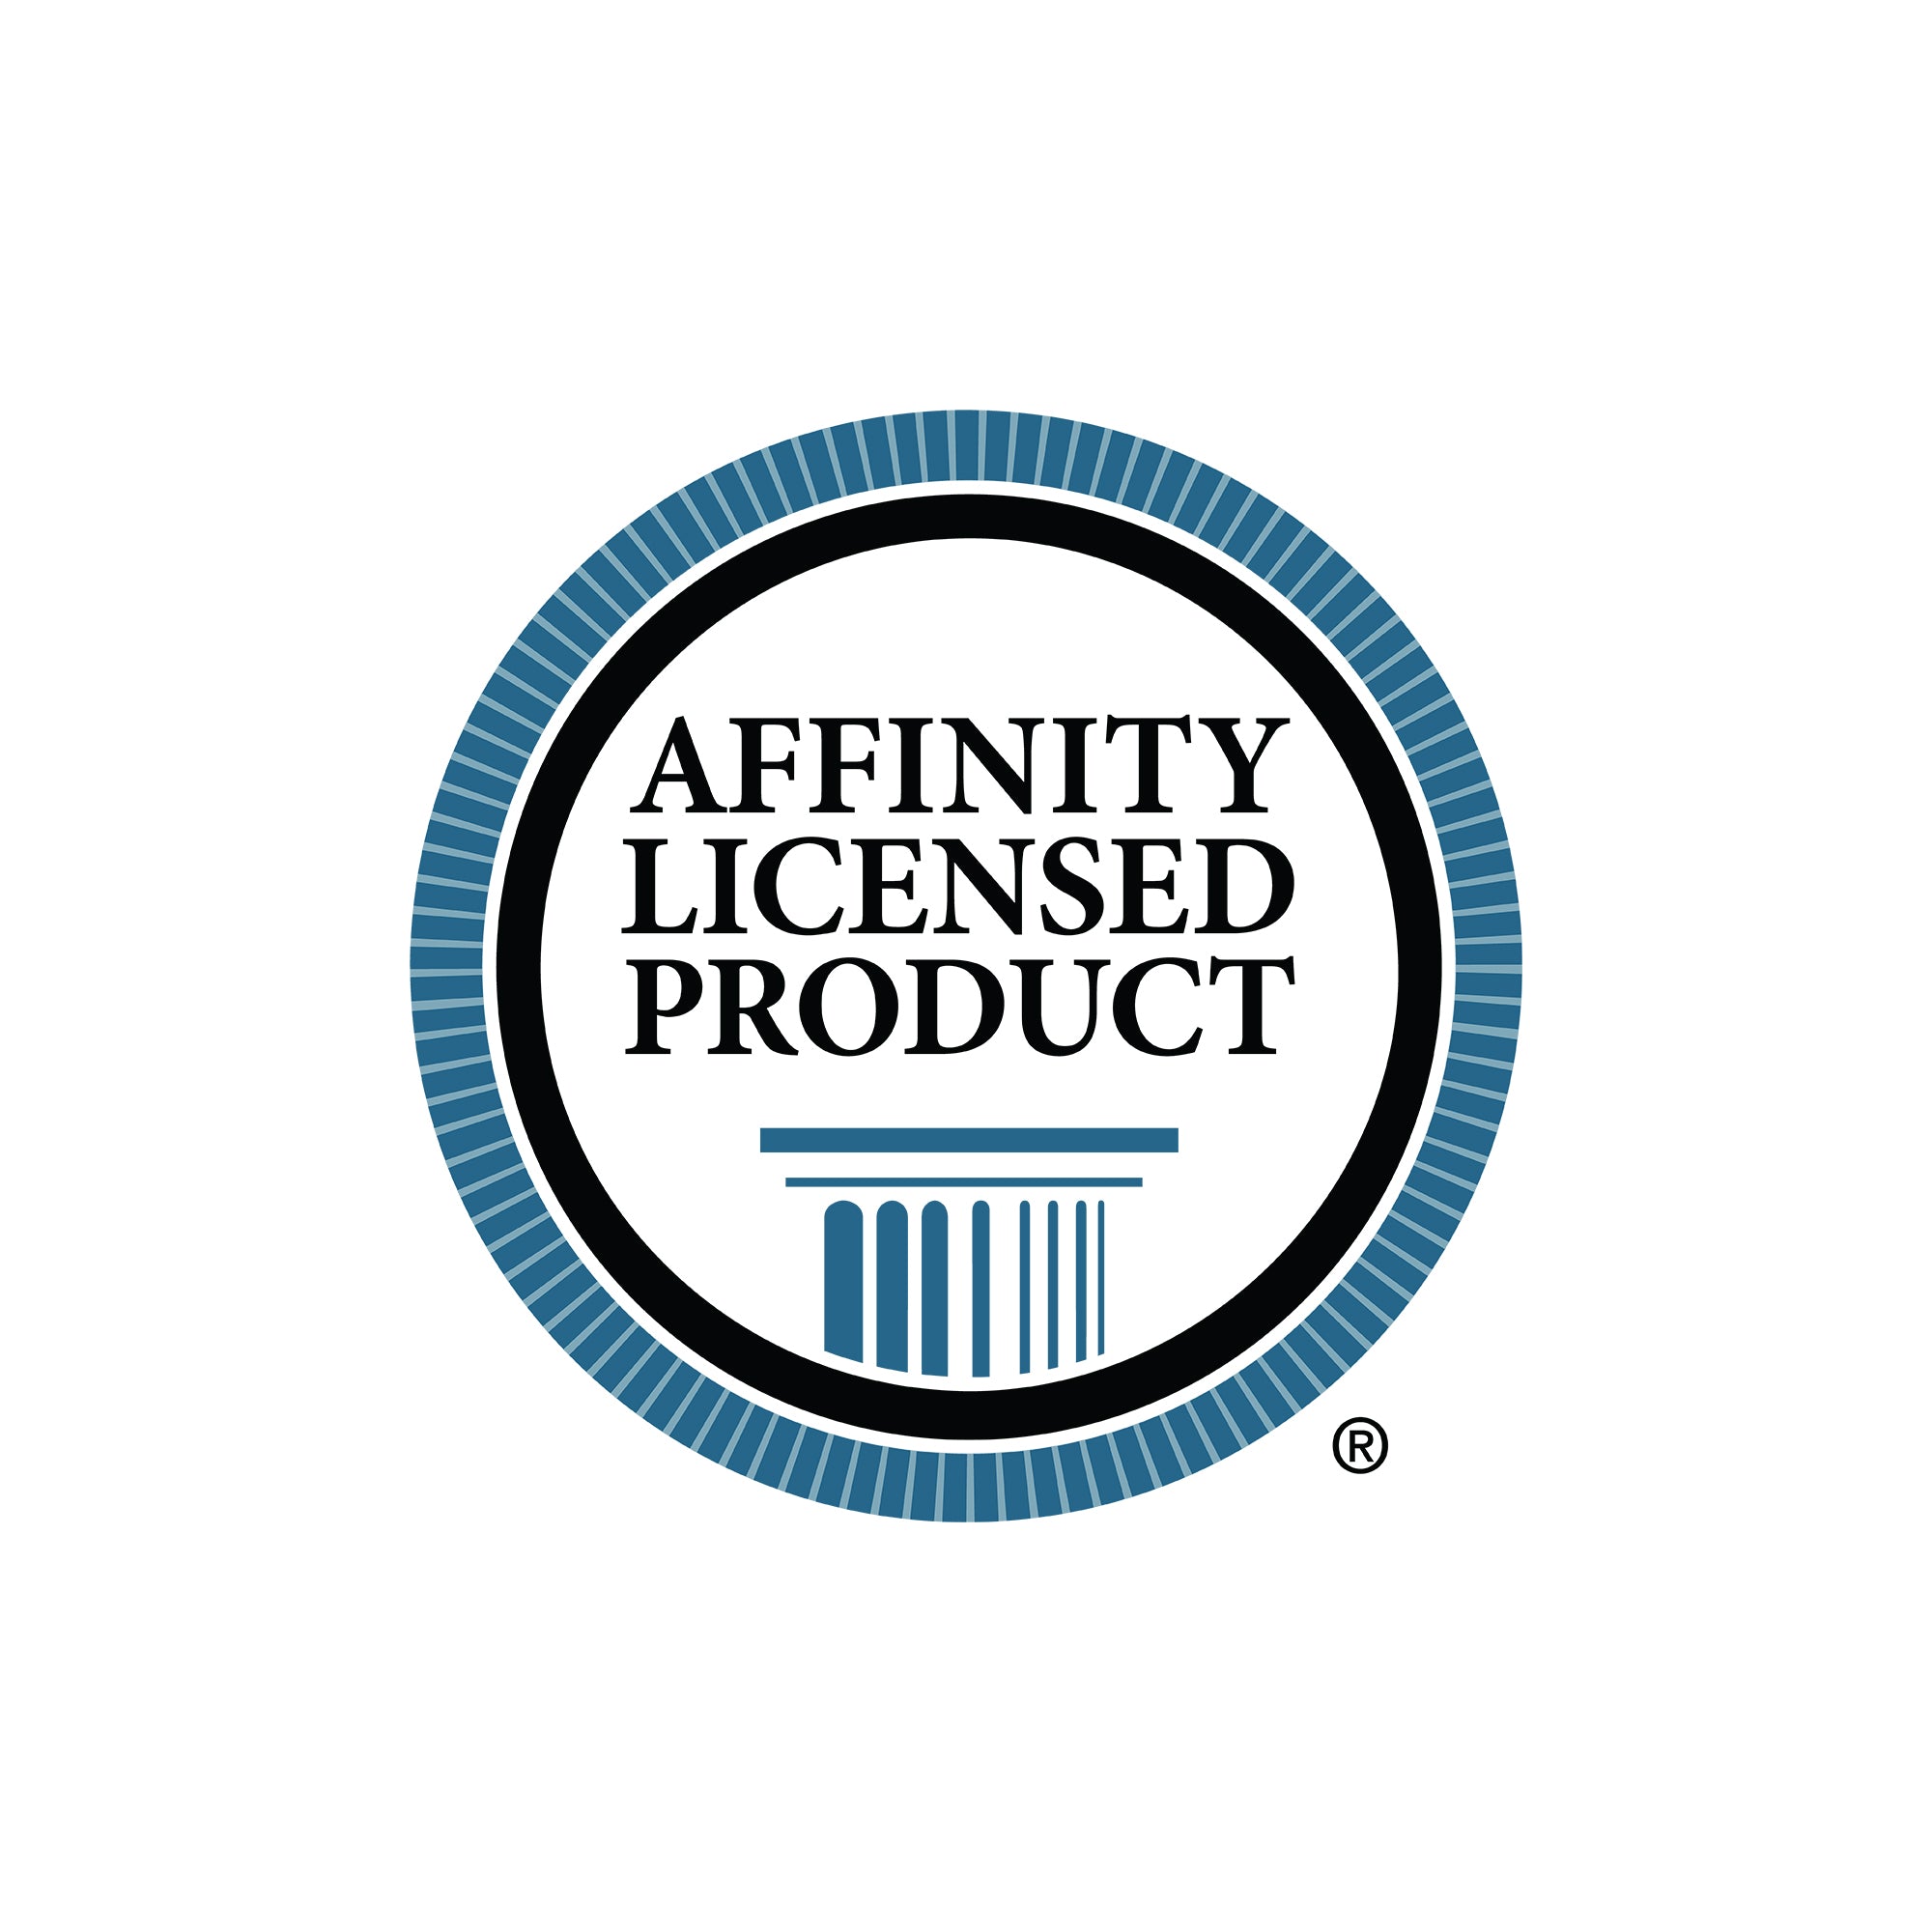 Affinity Officially Licensed Product